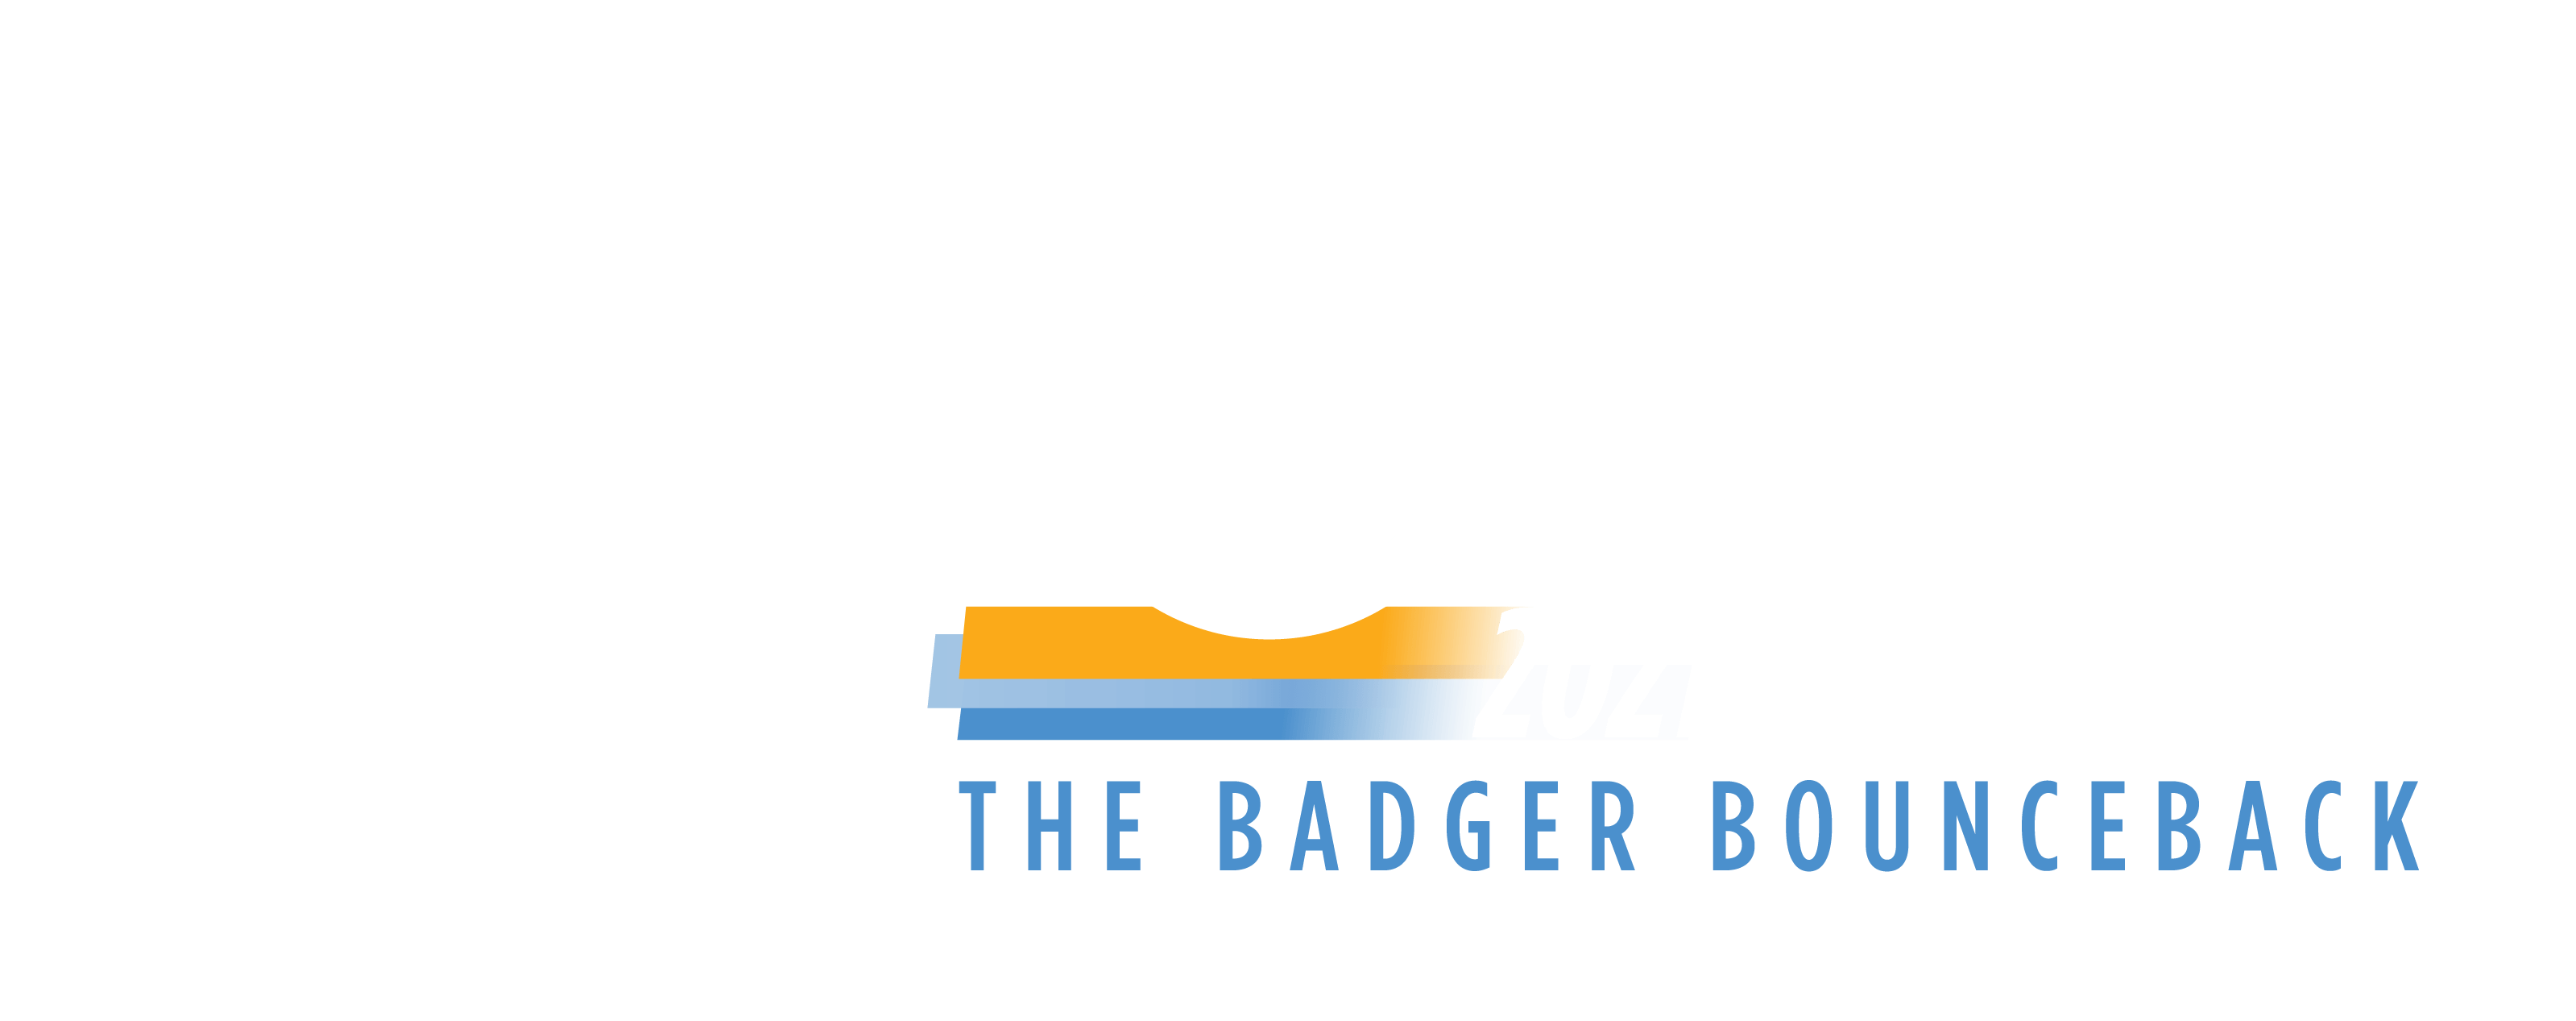 WisDems 2021 State Convention